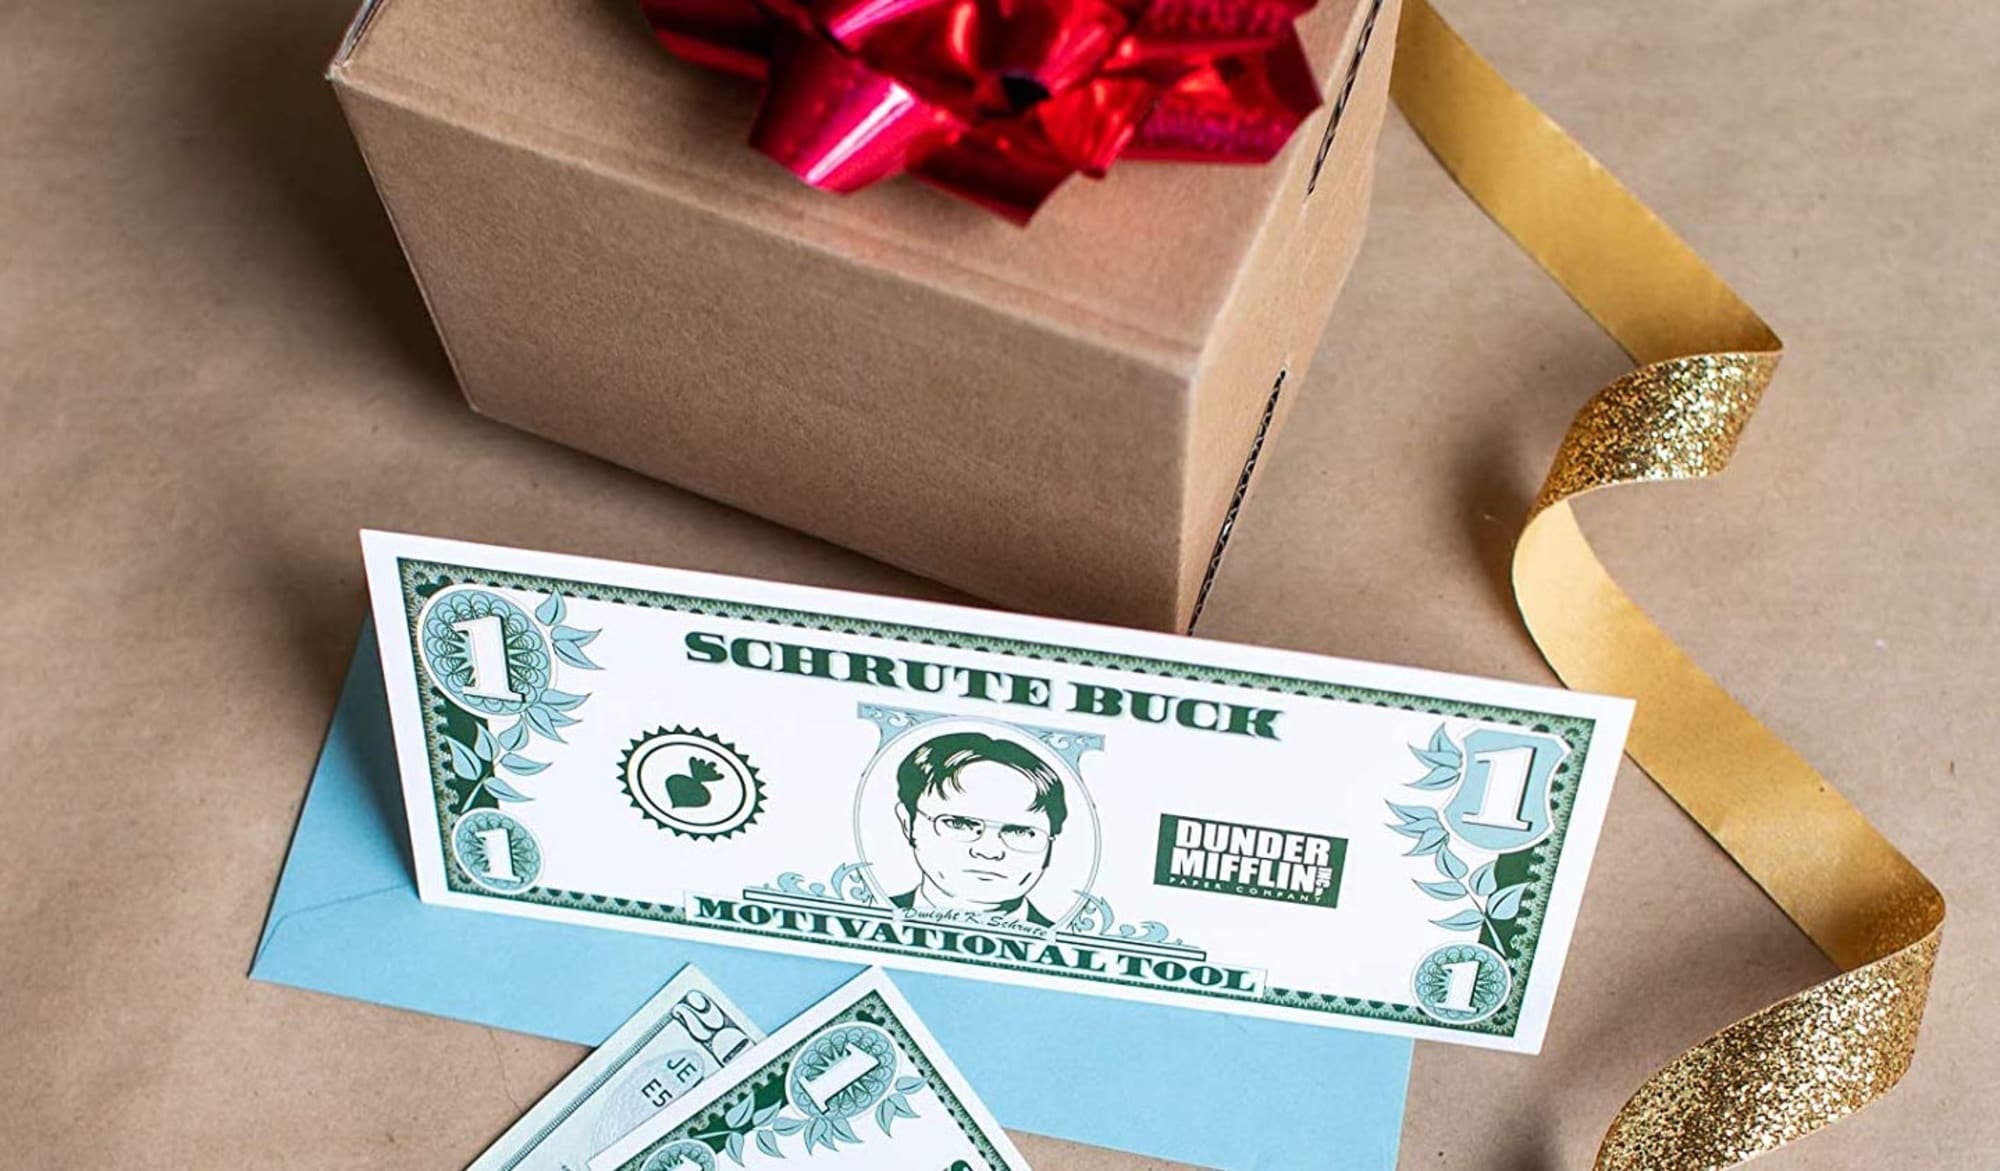 11 of the best gifts to give The Office fans this holiday season